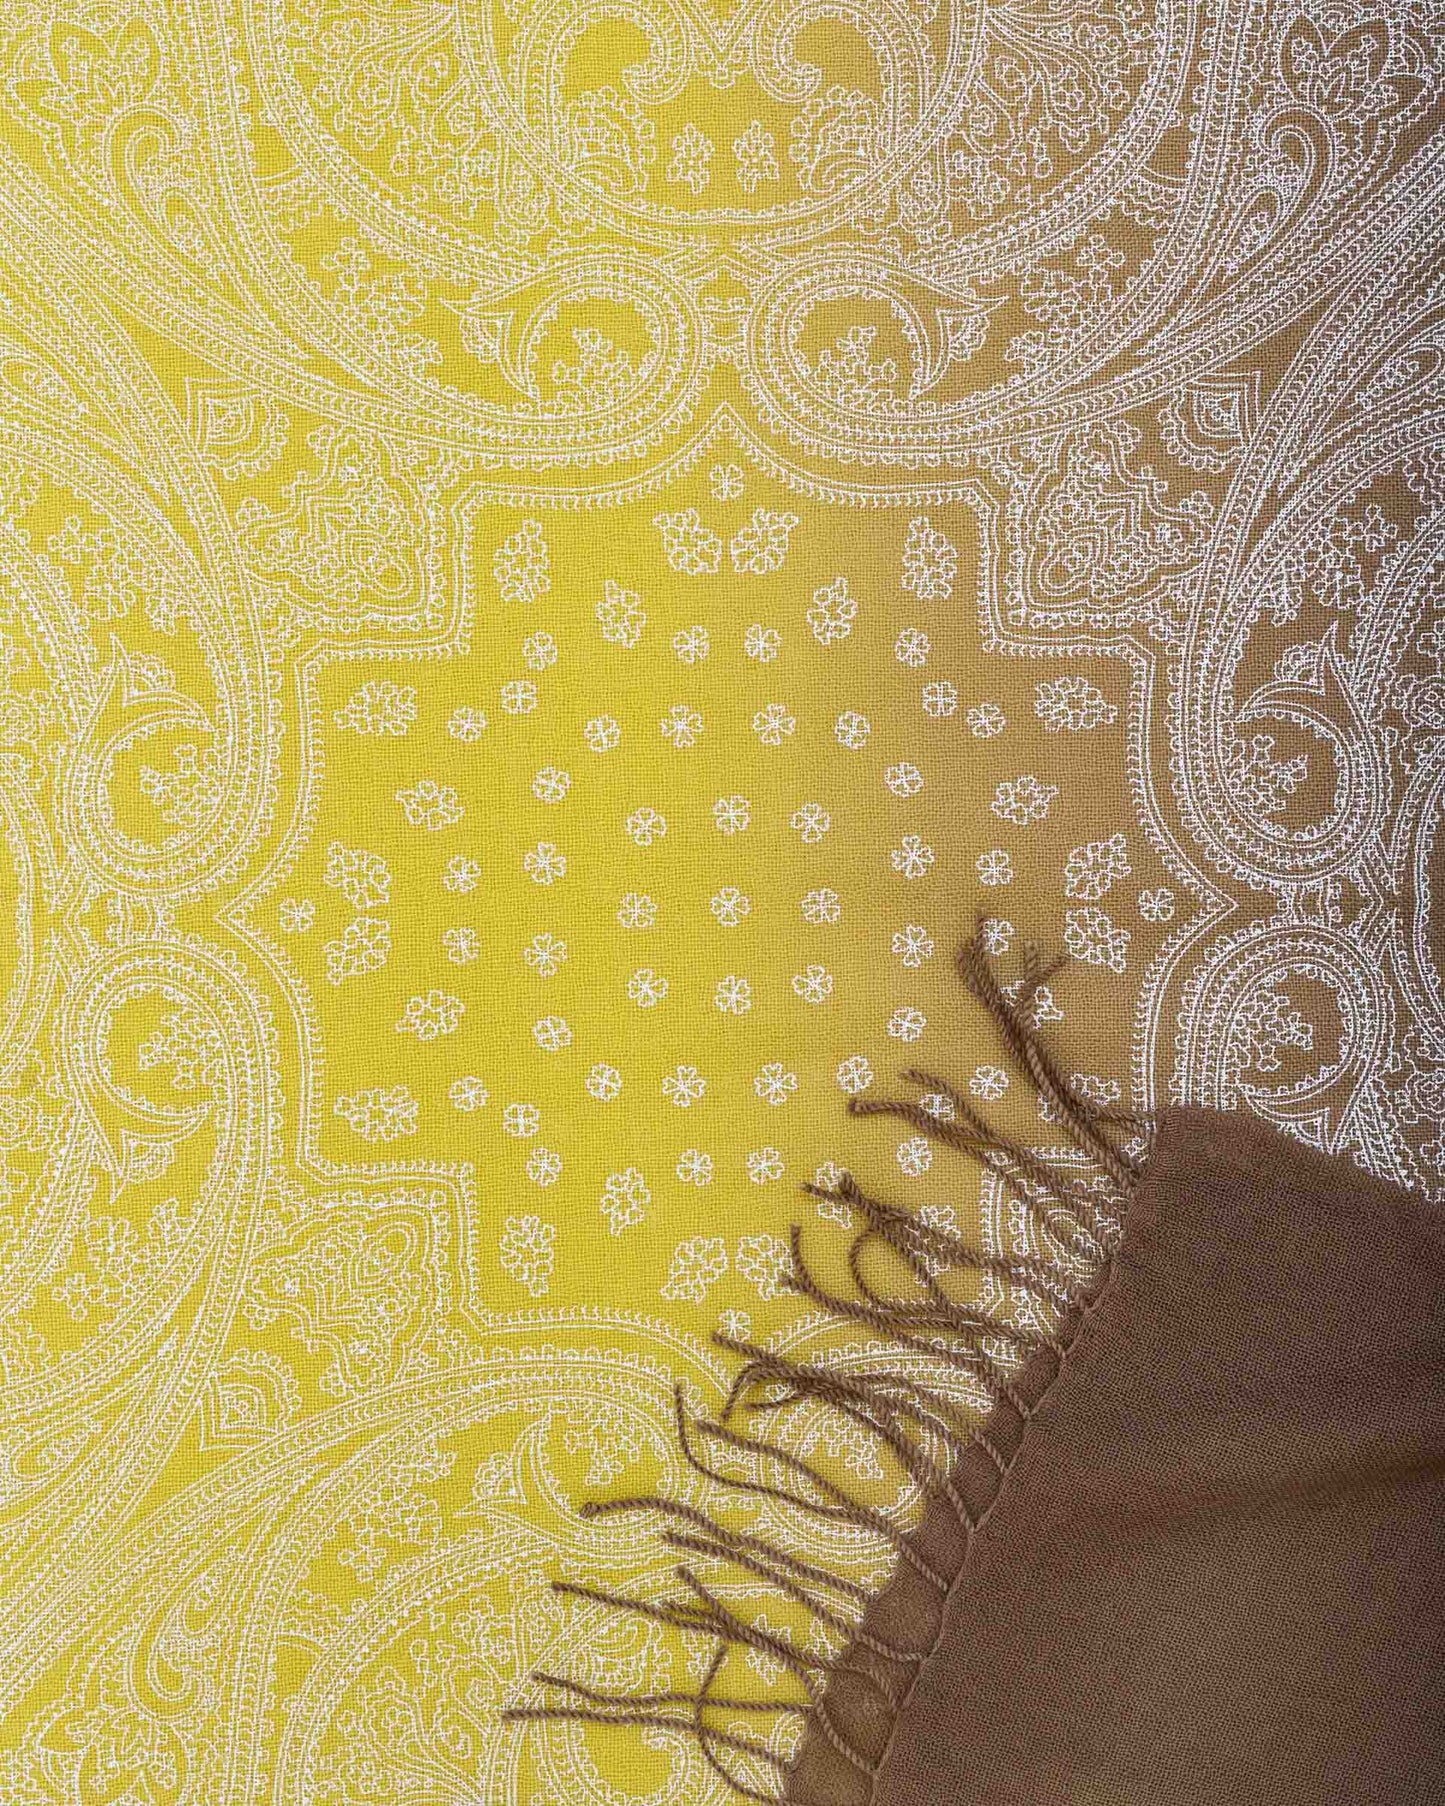 Hand Printed Wool and Cashmere Scarf with Yellow and Brown Degradé Gradient